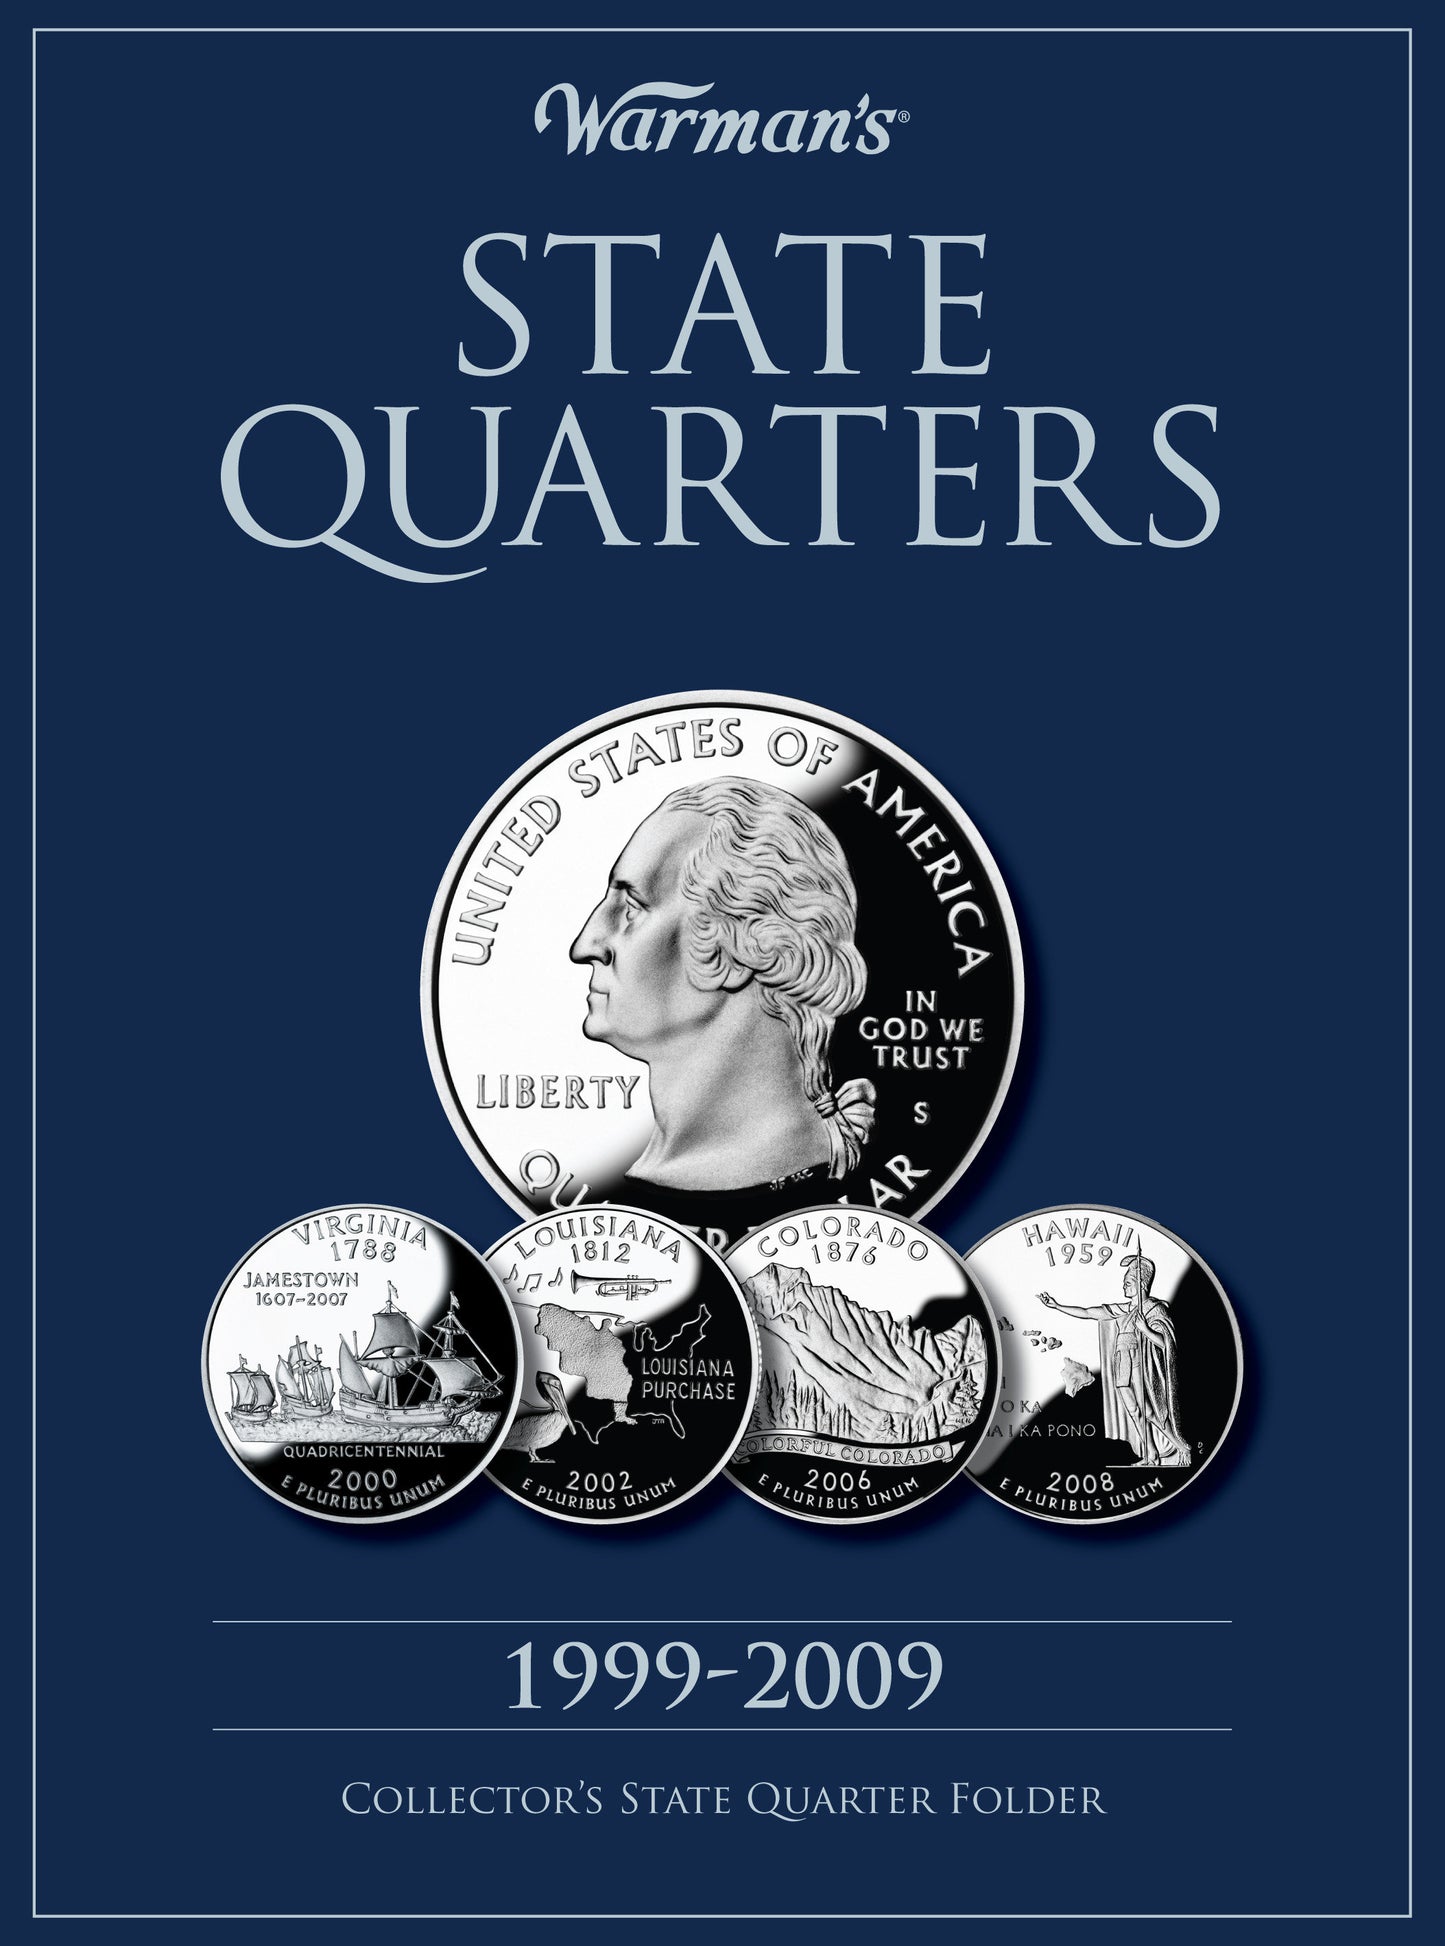 State Quarters 1999-2009 Collector's Folder